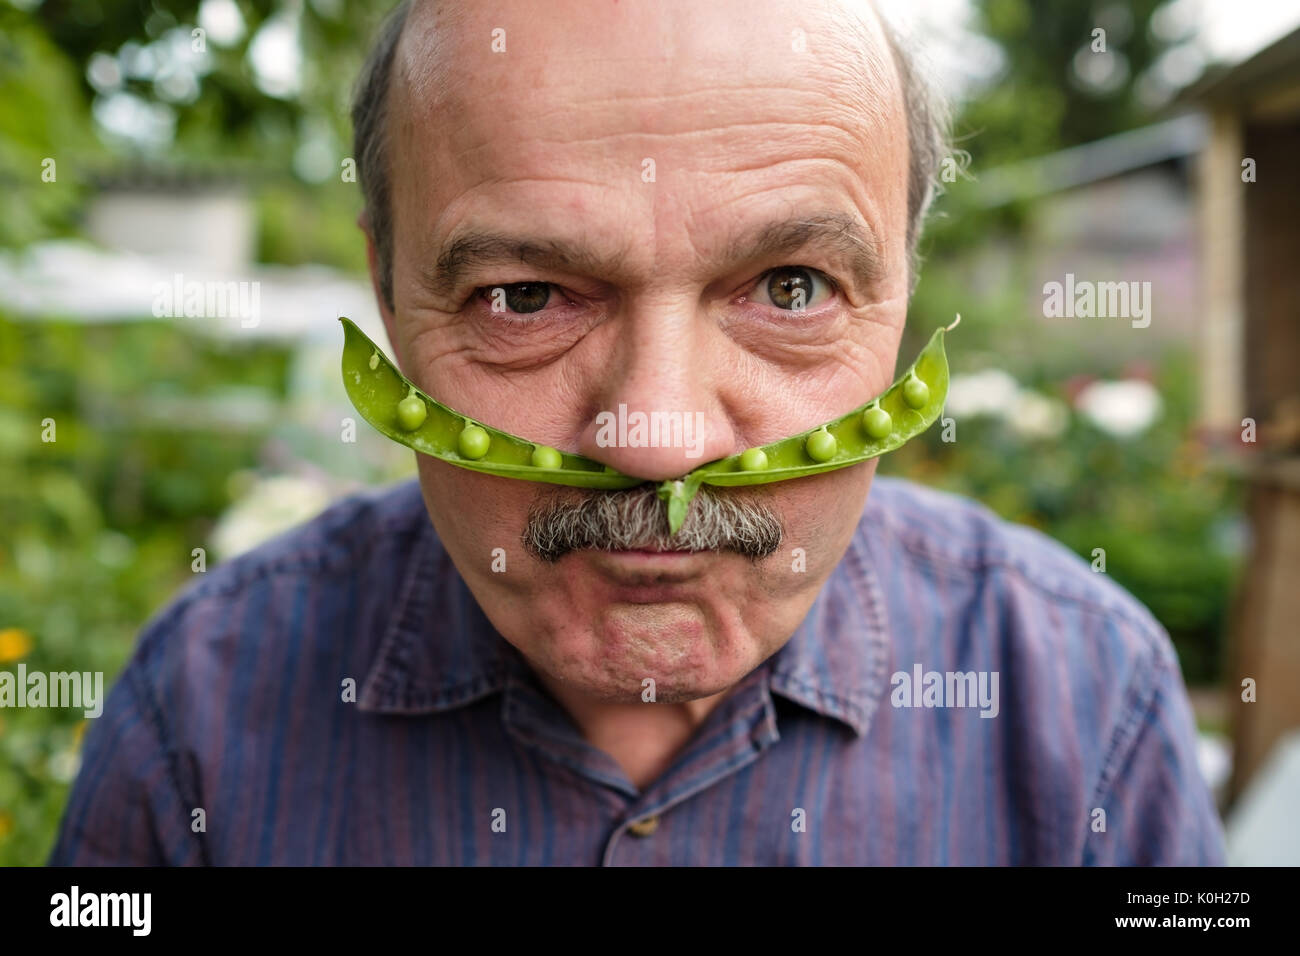 An elderly man is fooling around. He holds a pea pod near his face like a mustache Stock Photo